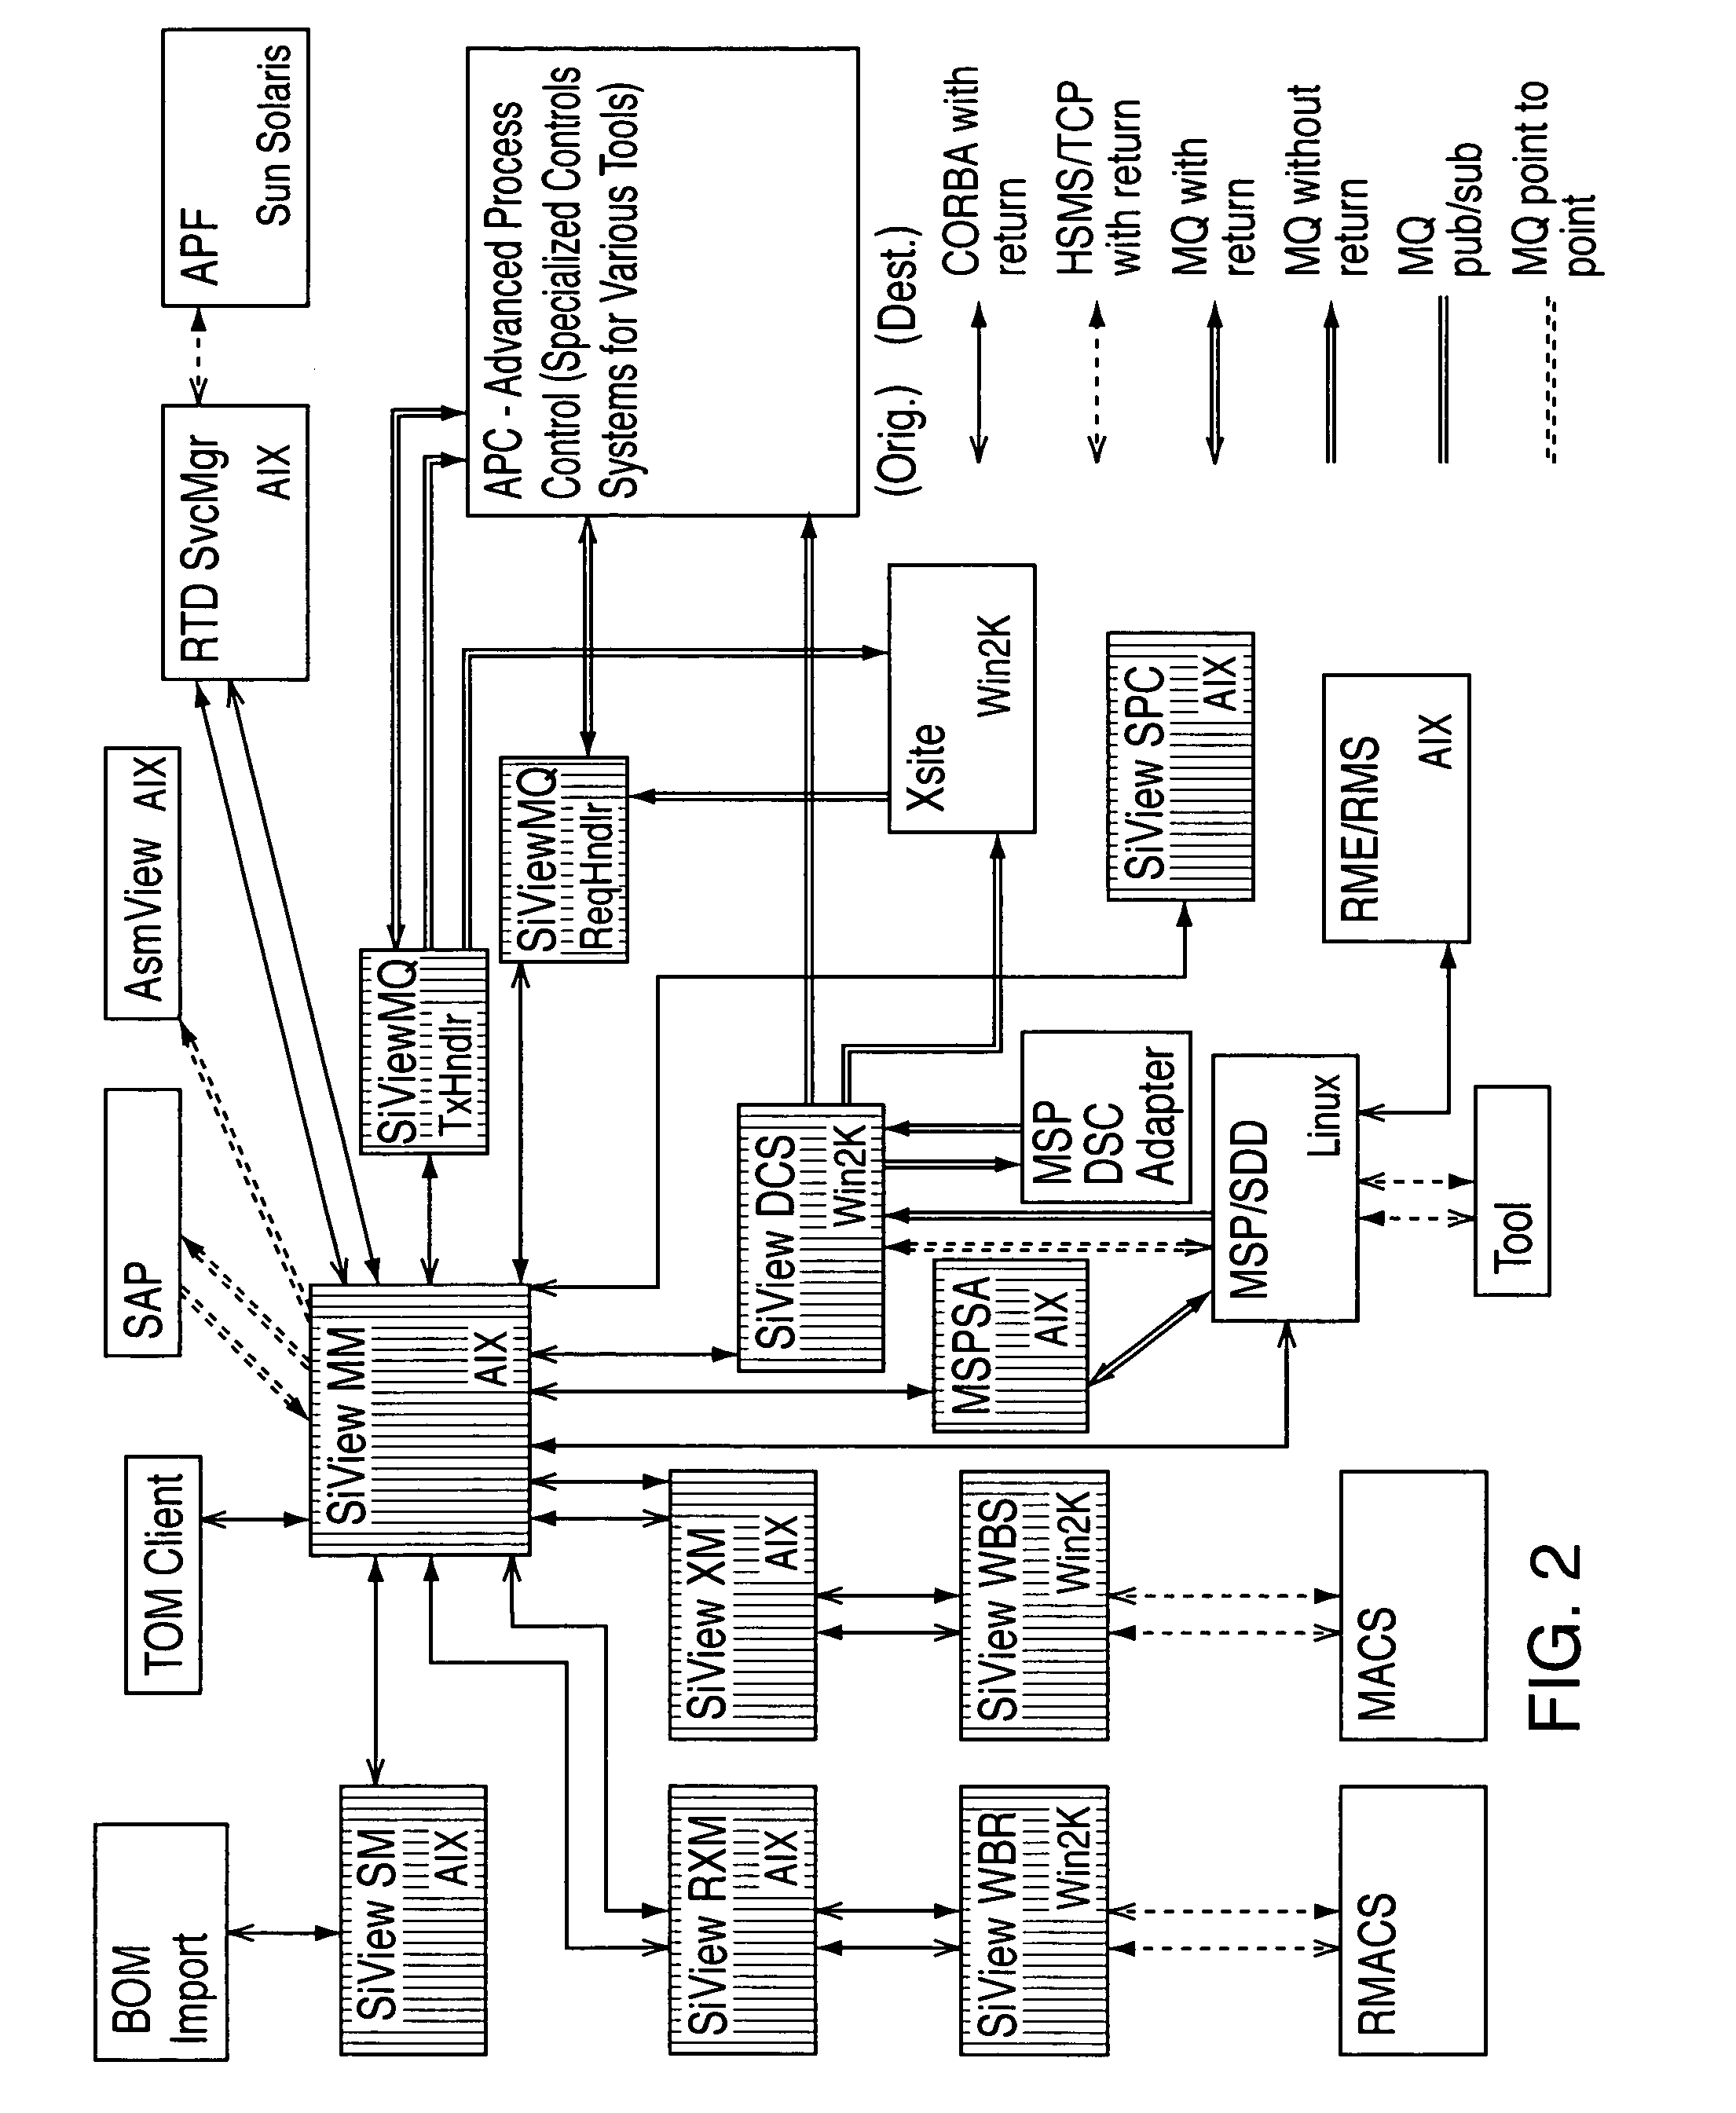 Method and system for automating issue resolution in manufacturing execution and material control systems